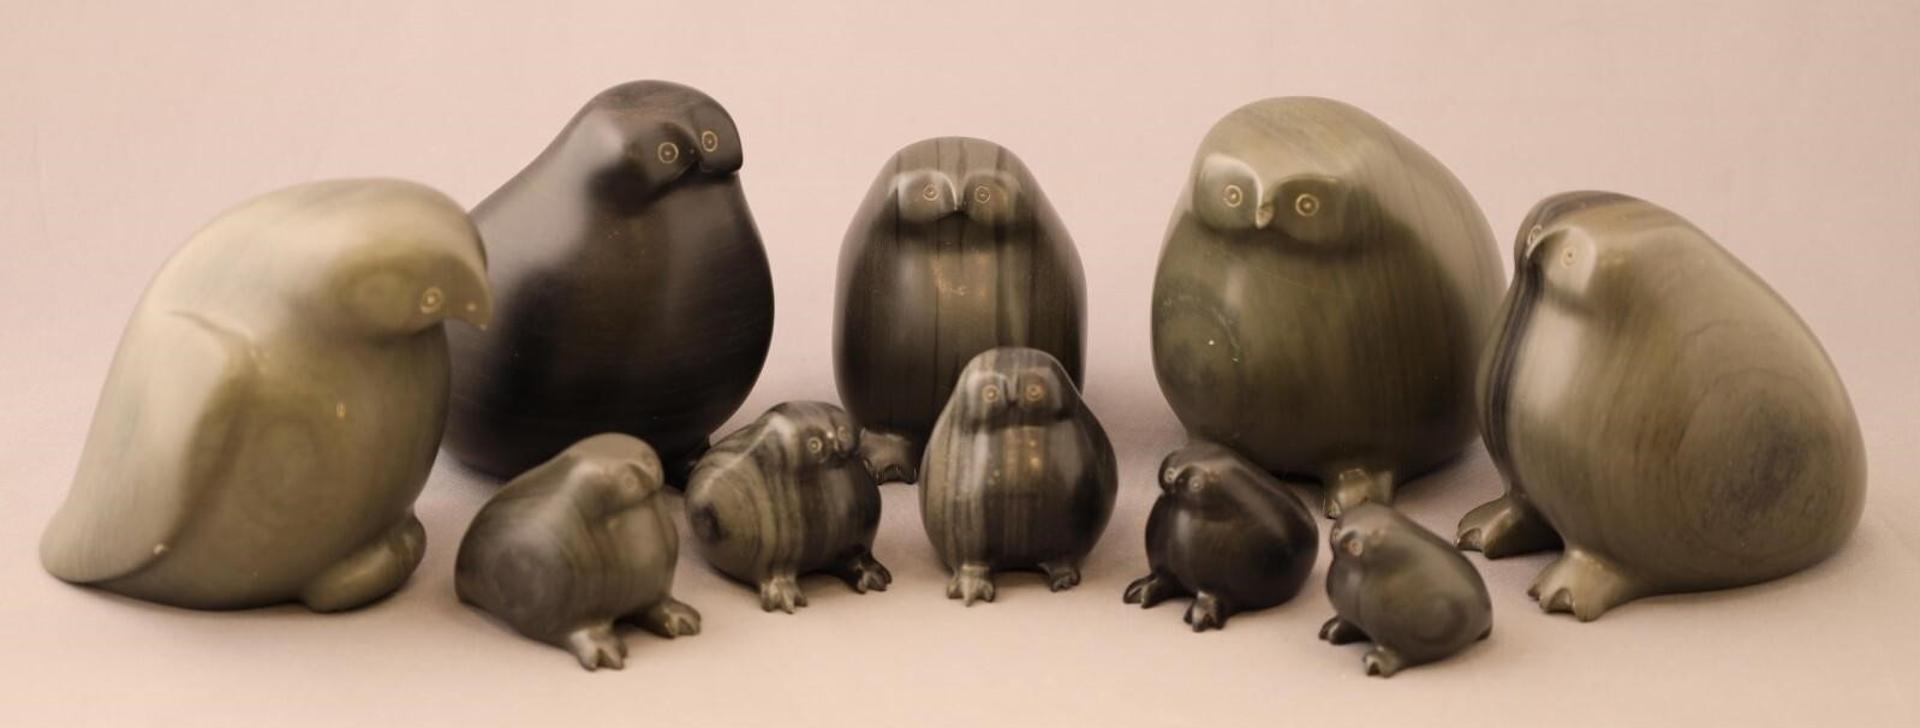 Mina Inuktaluk (1932) - an assembled grouping of grey and black carved stone Owls